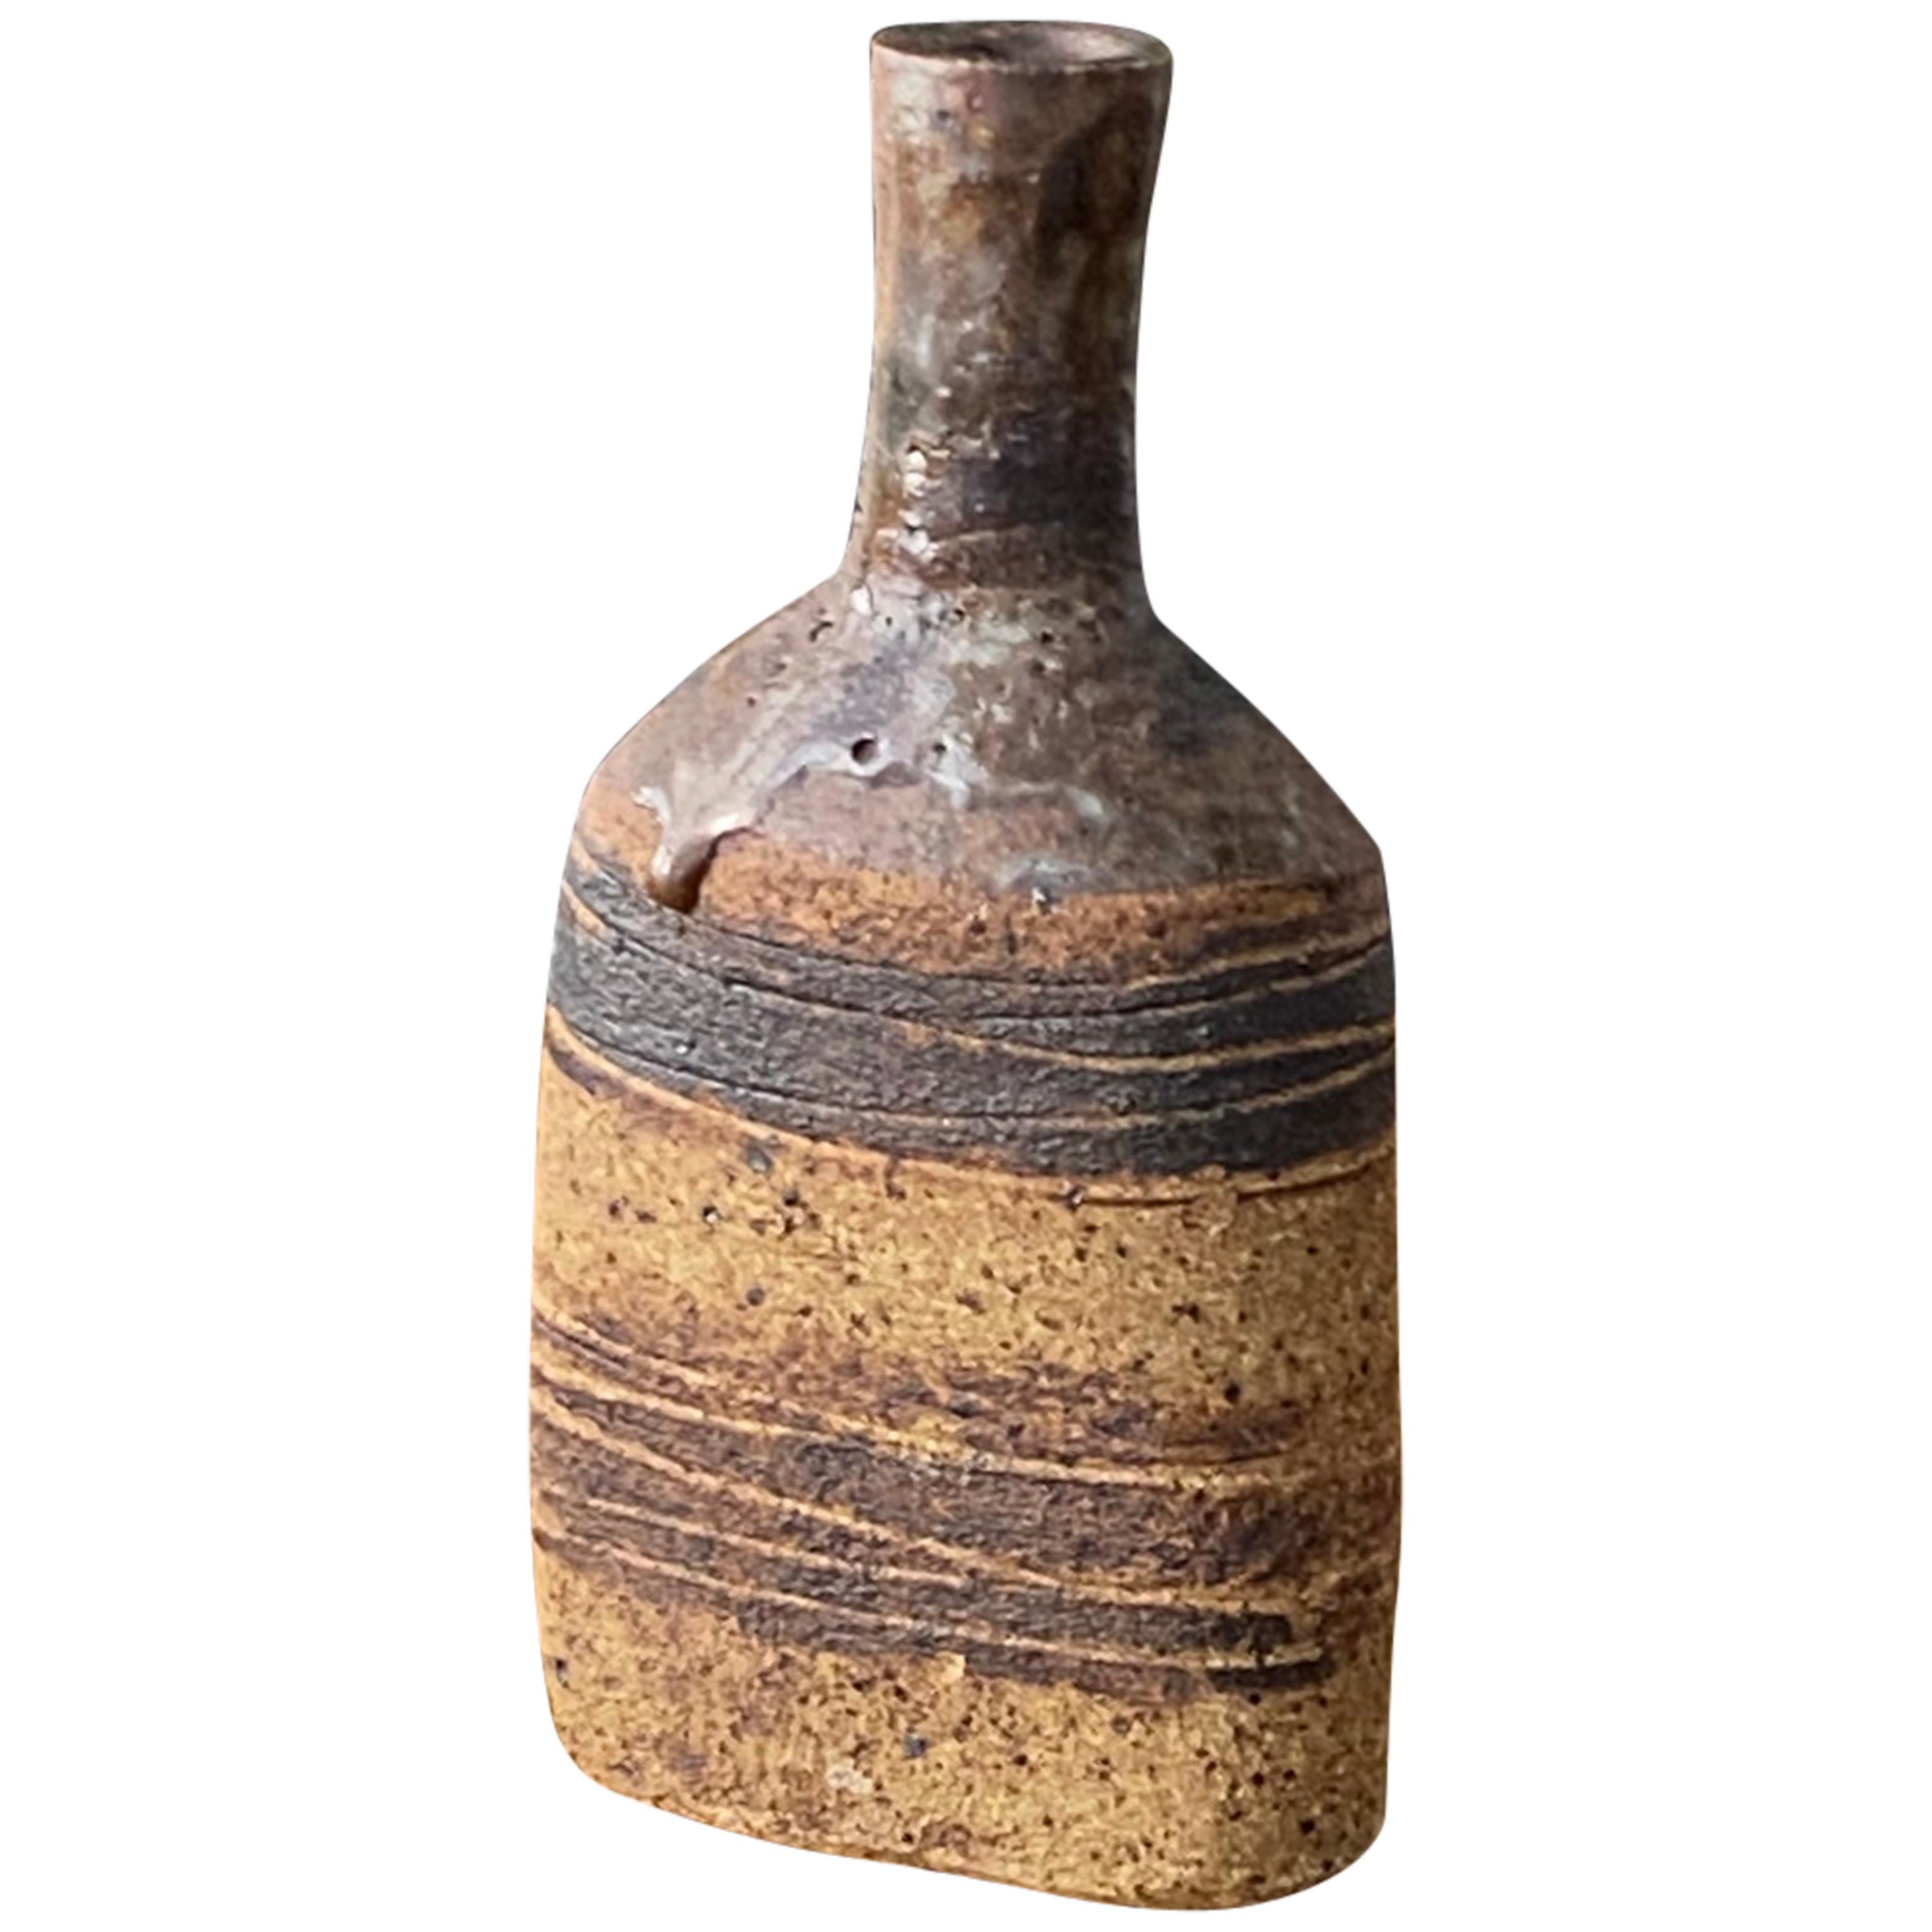 Tue Poulsen, Small Hand Painted Vase, Brown Stoneware, 1960s, Denmark at  1stDibs